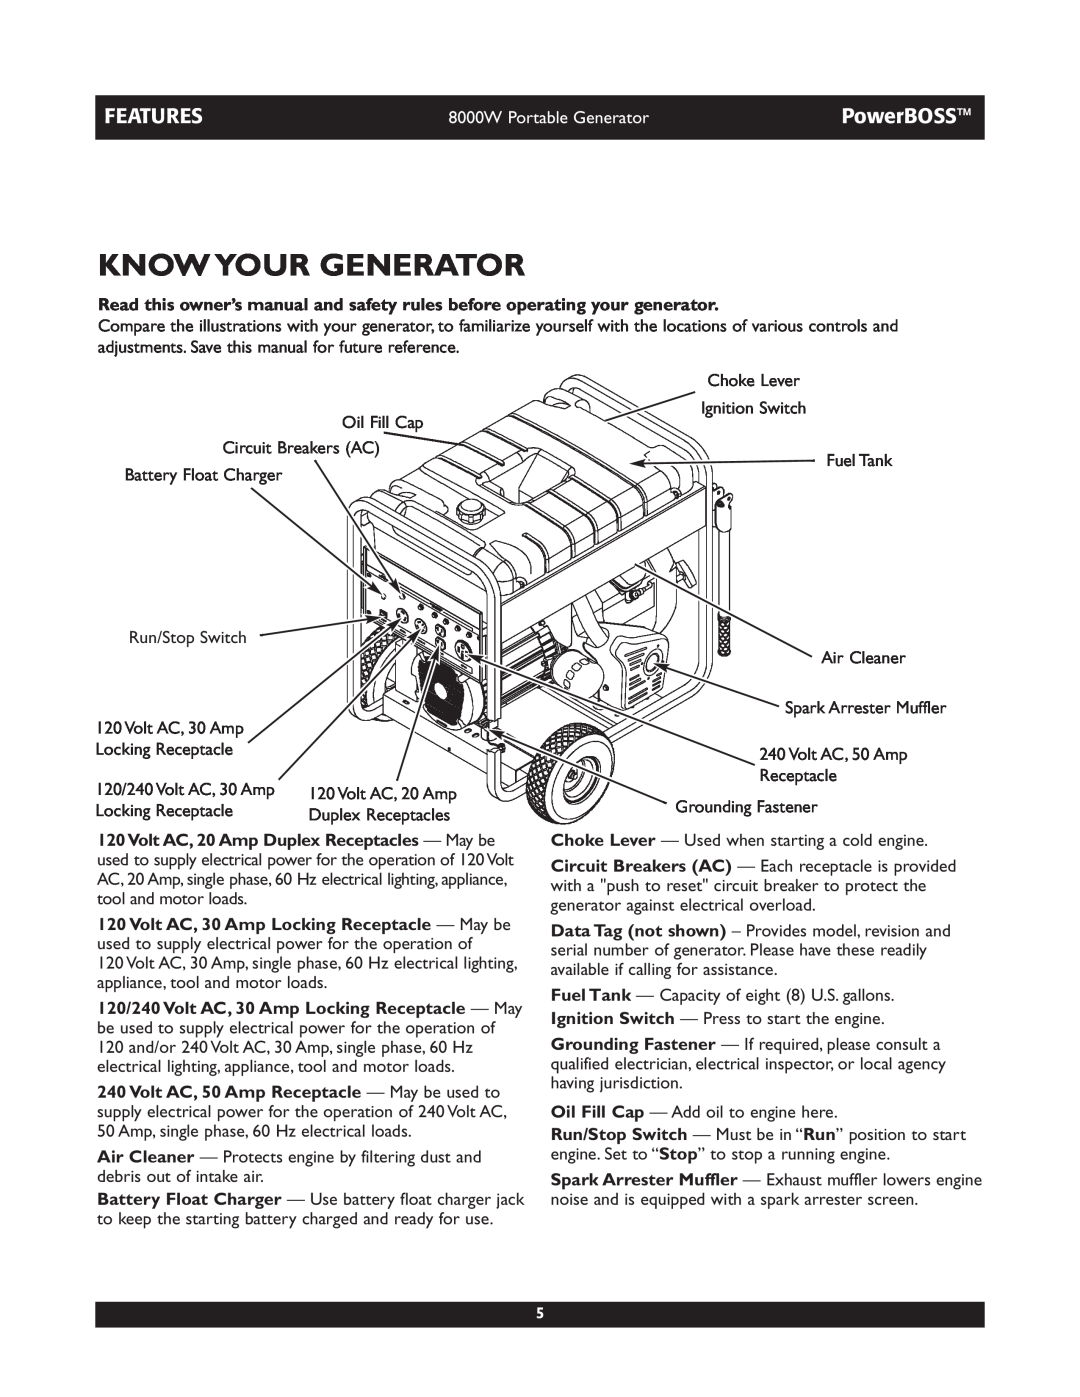 Briggs & Stratton 30228 owner manual Know Your Generator, Features, PowerBOSS, 8000W Portable Generator 